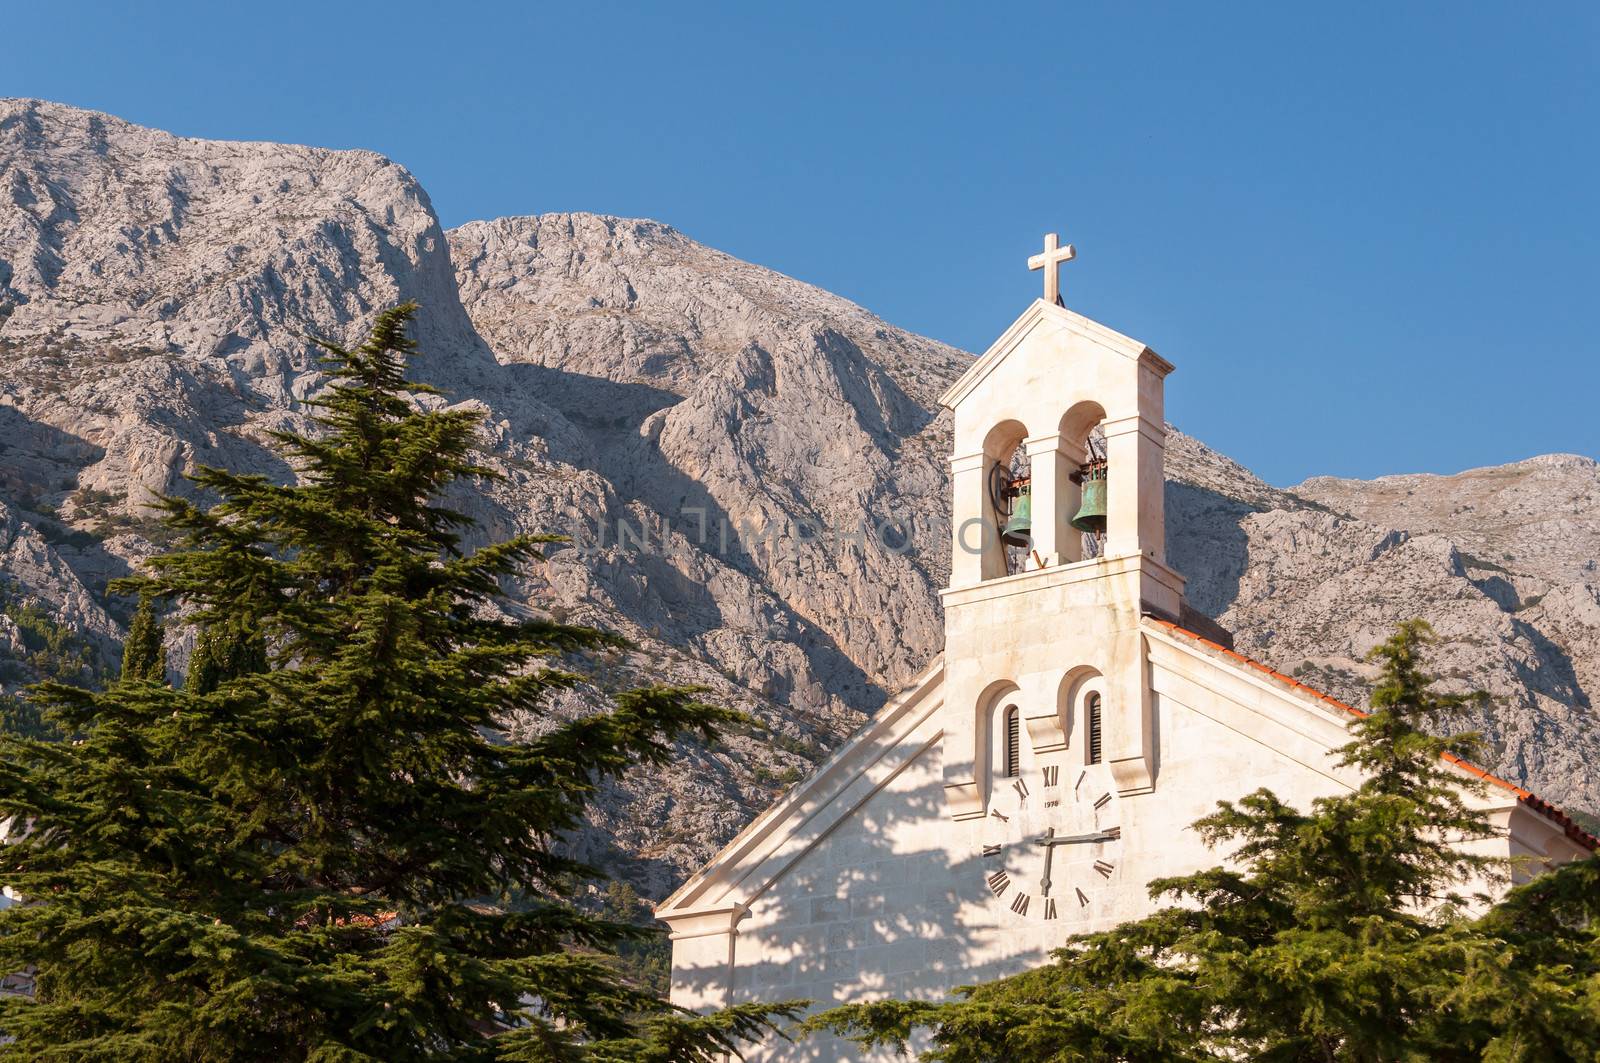 St Nicholas Church's bells with mountains in background in Baska Voda in Croatia.